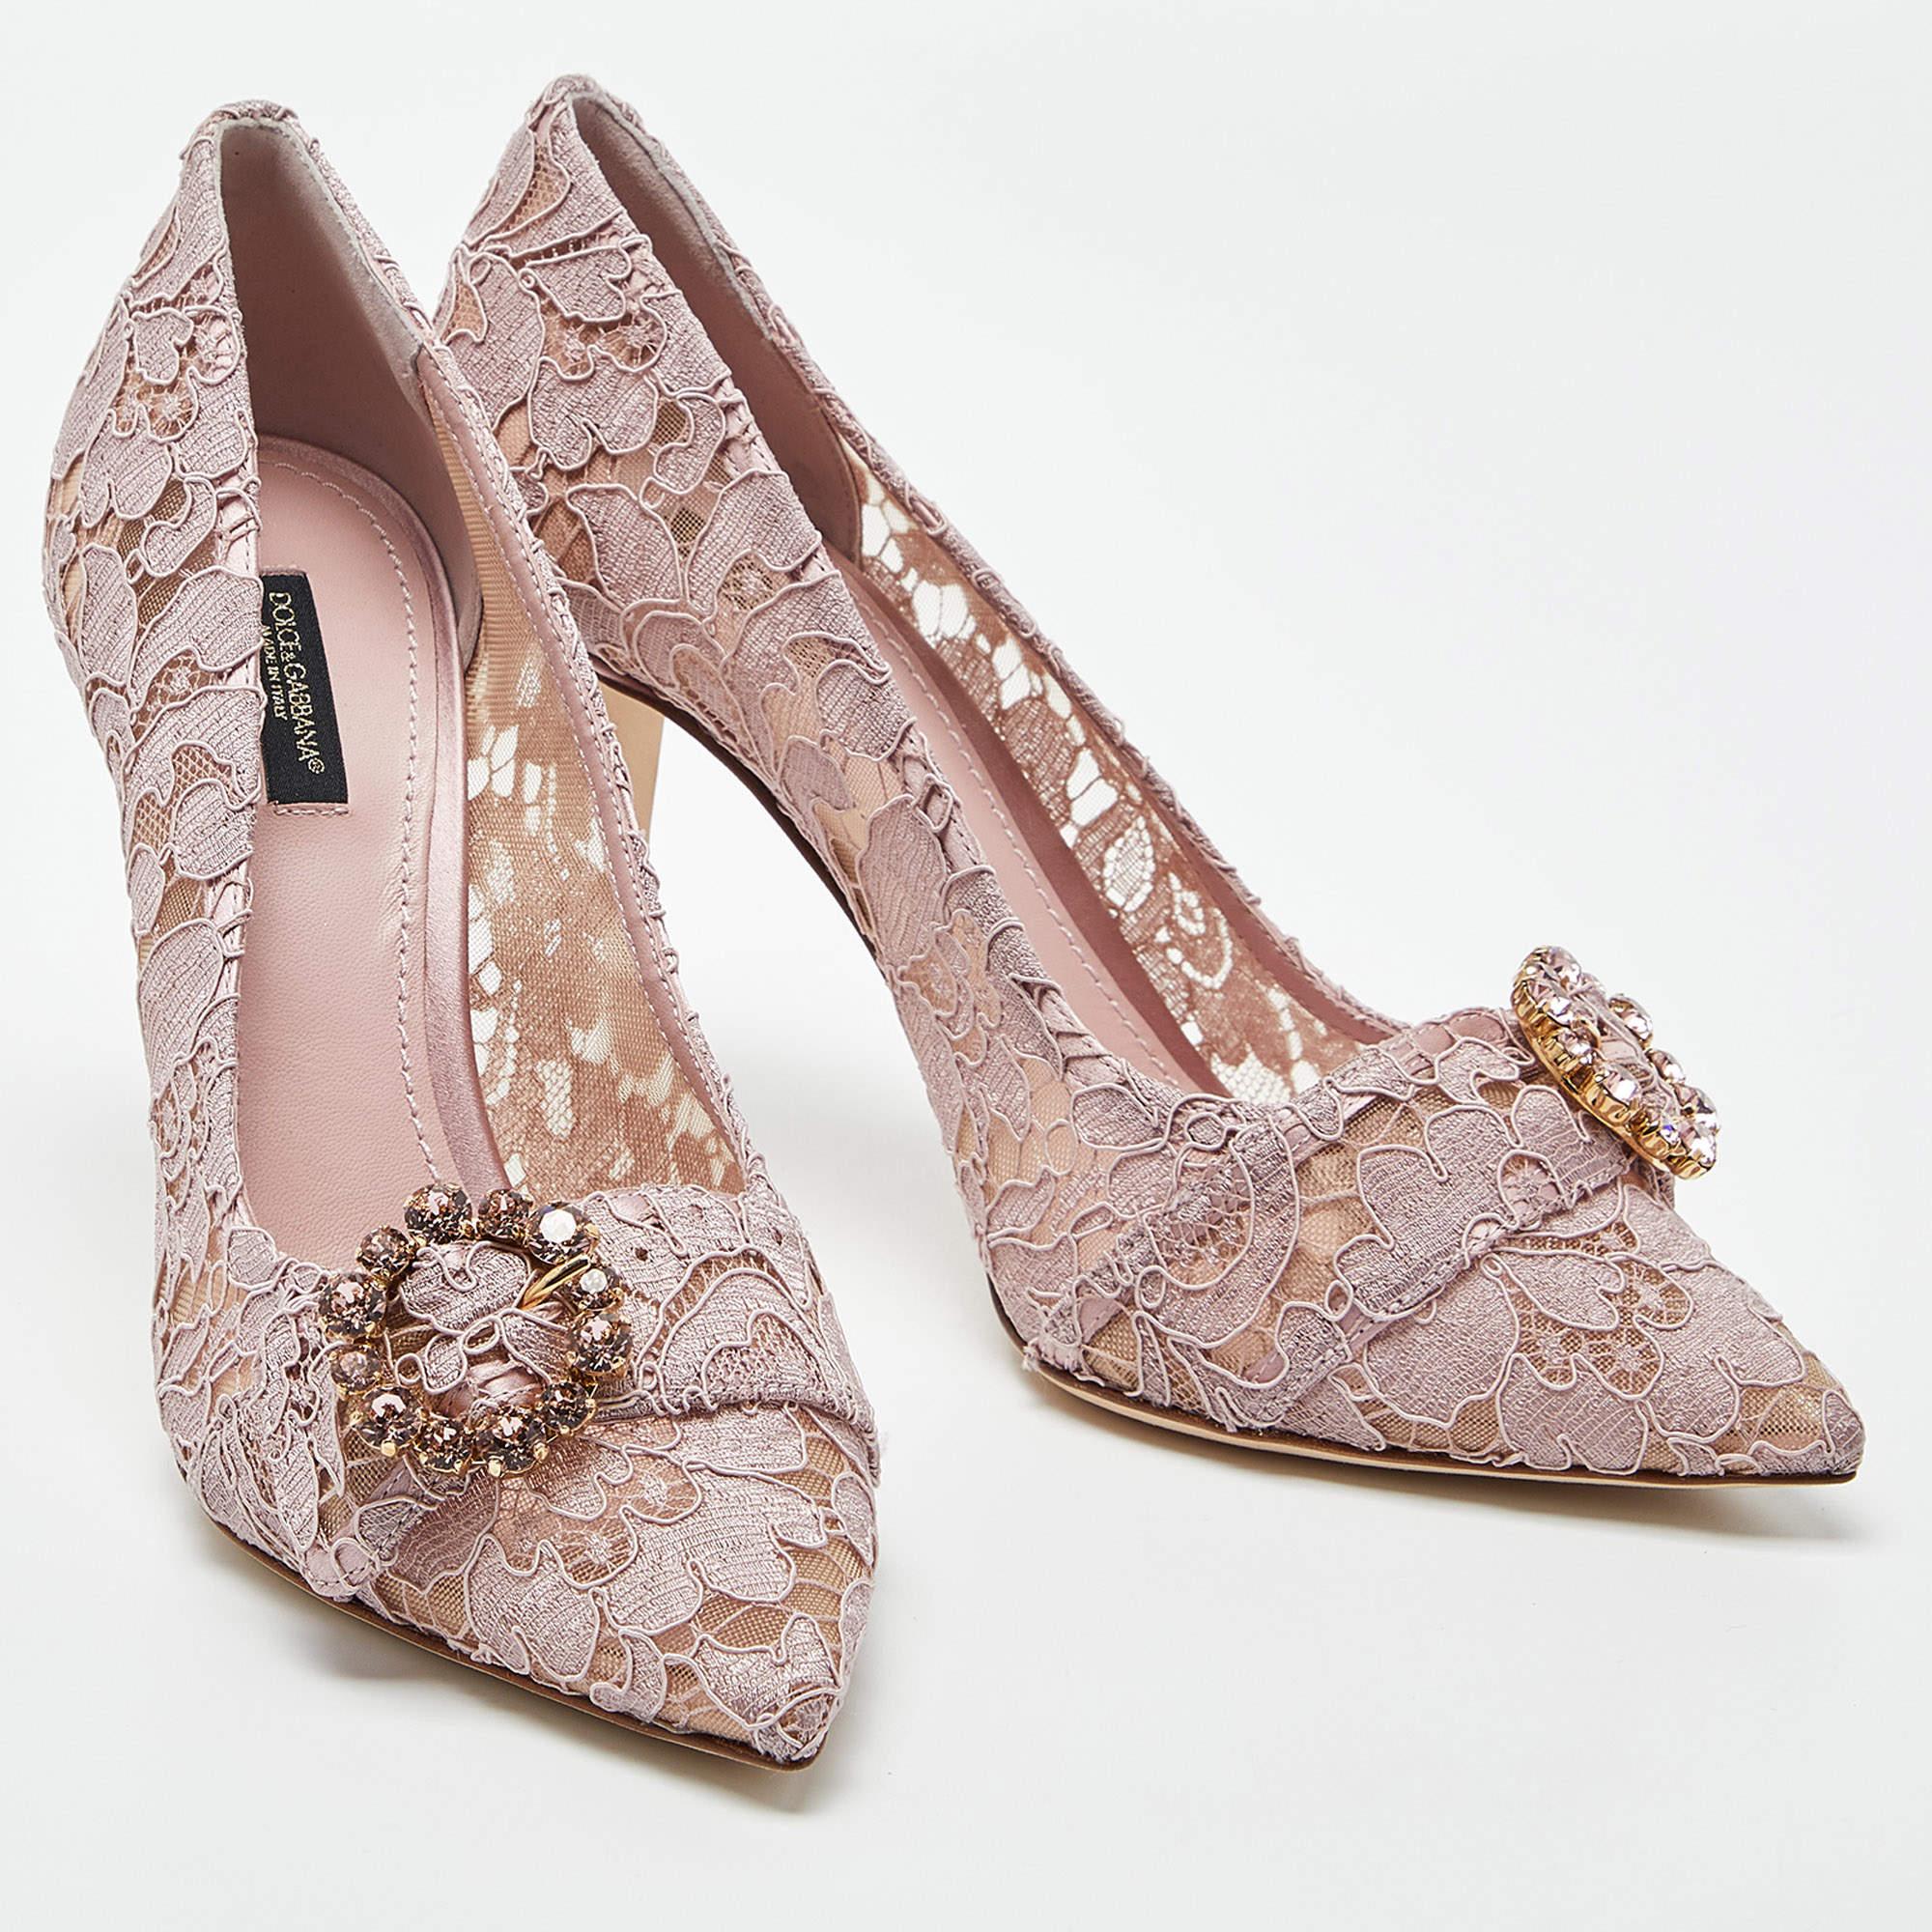 Dolce & Gabbana Lilac Lace Crystal Embellishment Pointed Toe Pumps Size 40 1